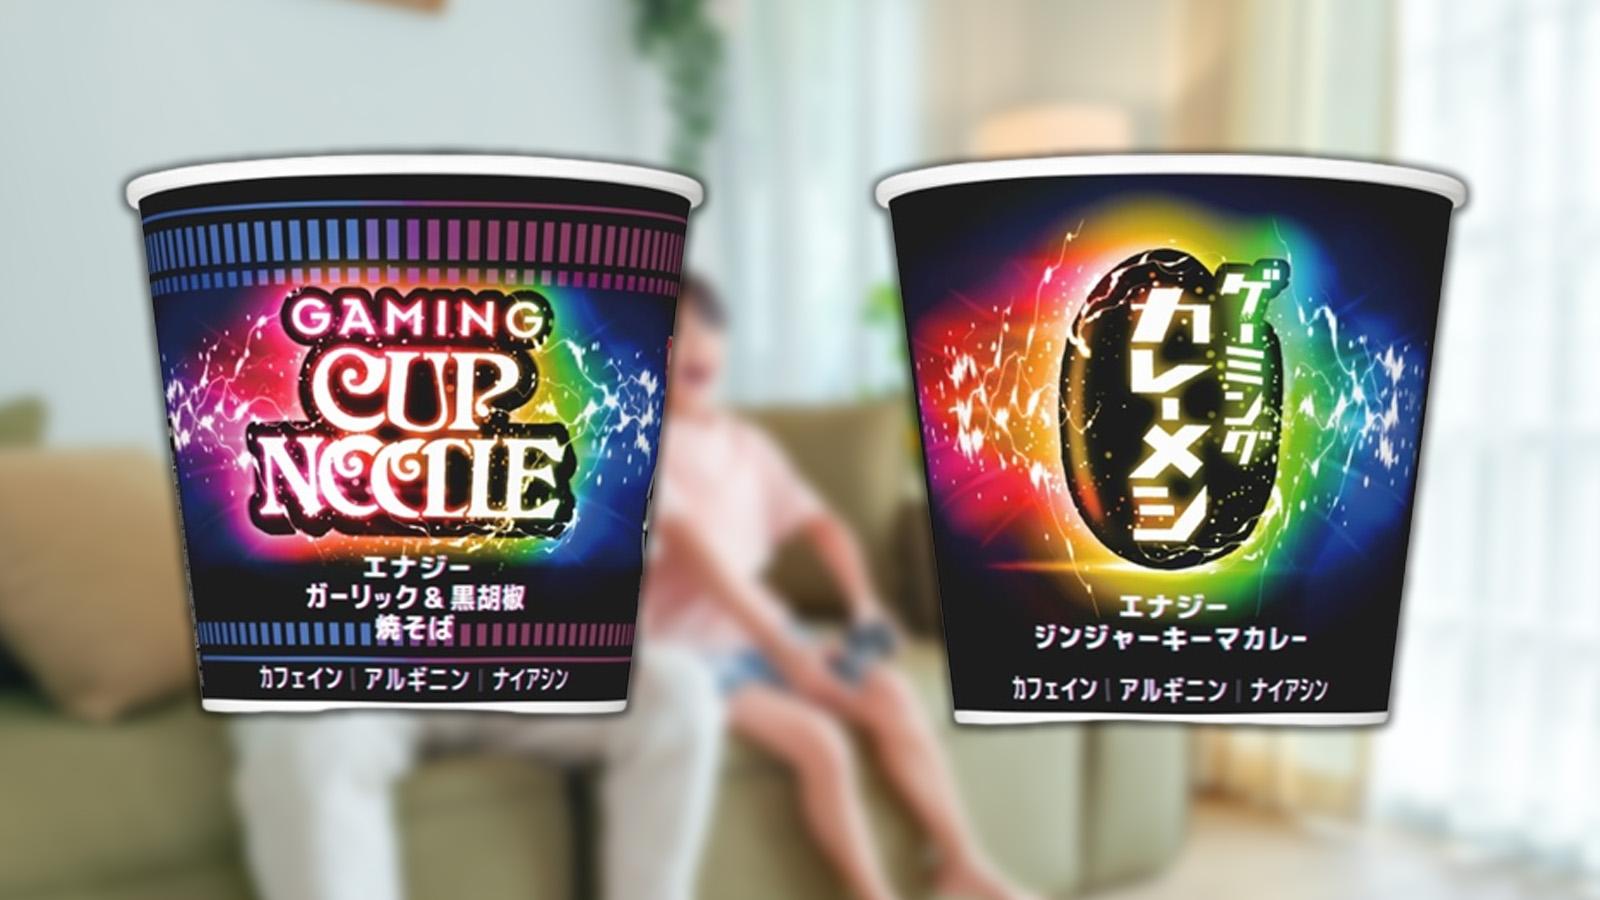 A super strange type of boxed noodles for gamers appears, containing caffeine, so you can eat a package and stay awake through the night - Photo 1.